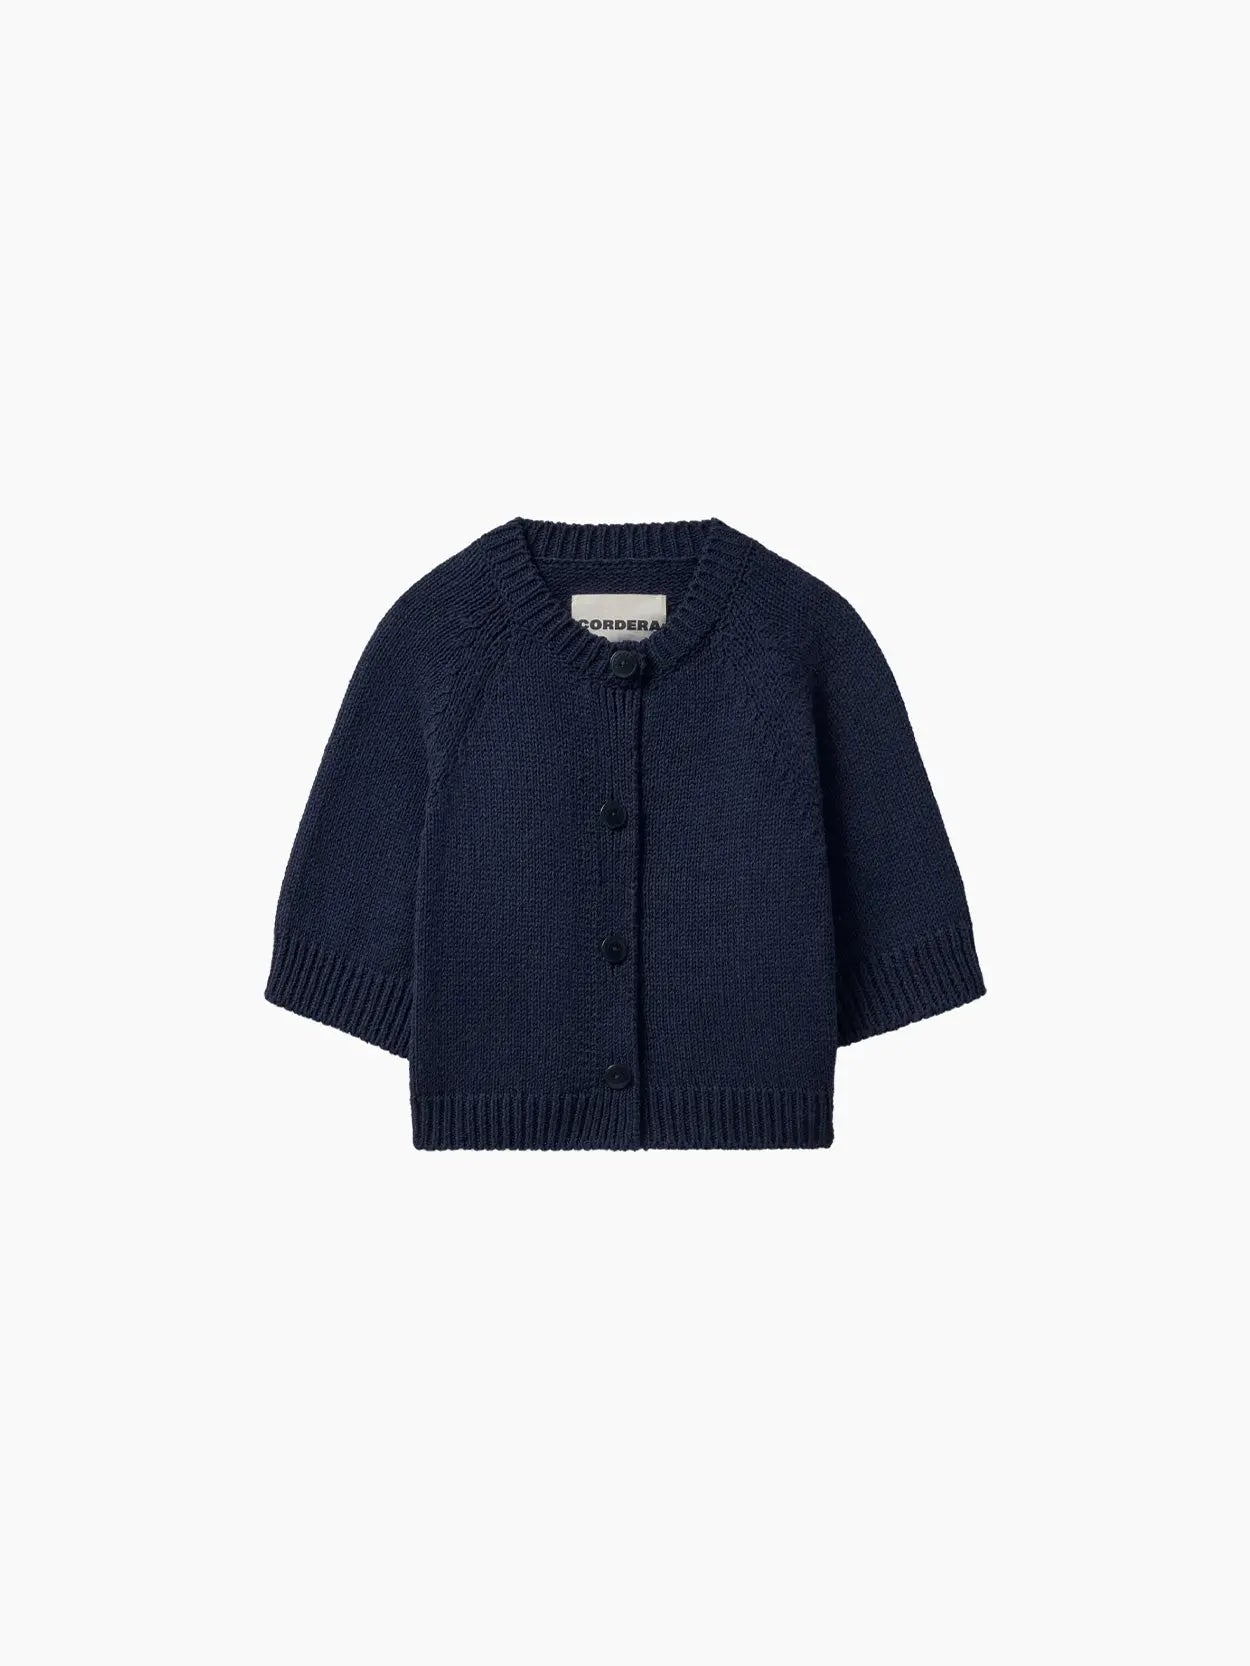 A navy blue, long-sleeve, knitted cardigan for a baby available at Bassalstore. The **Cotton Buttoned Top Navy** from **Cordera** features a round neckline, ribbed cuffs and hem, and button closures down the front. The fabric appears soft and cozy, ideal for keeping a baby warm.